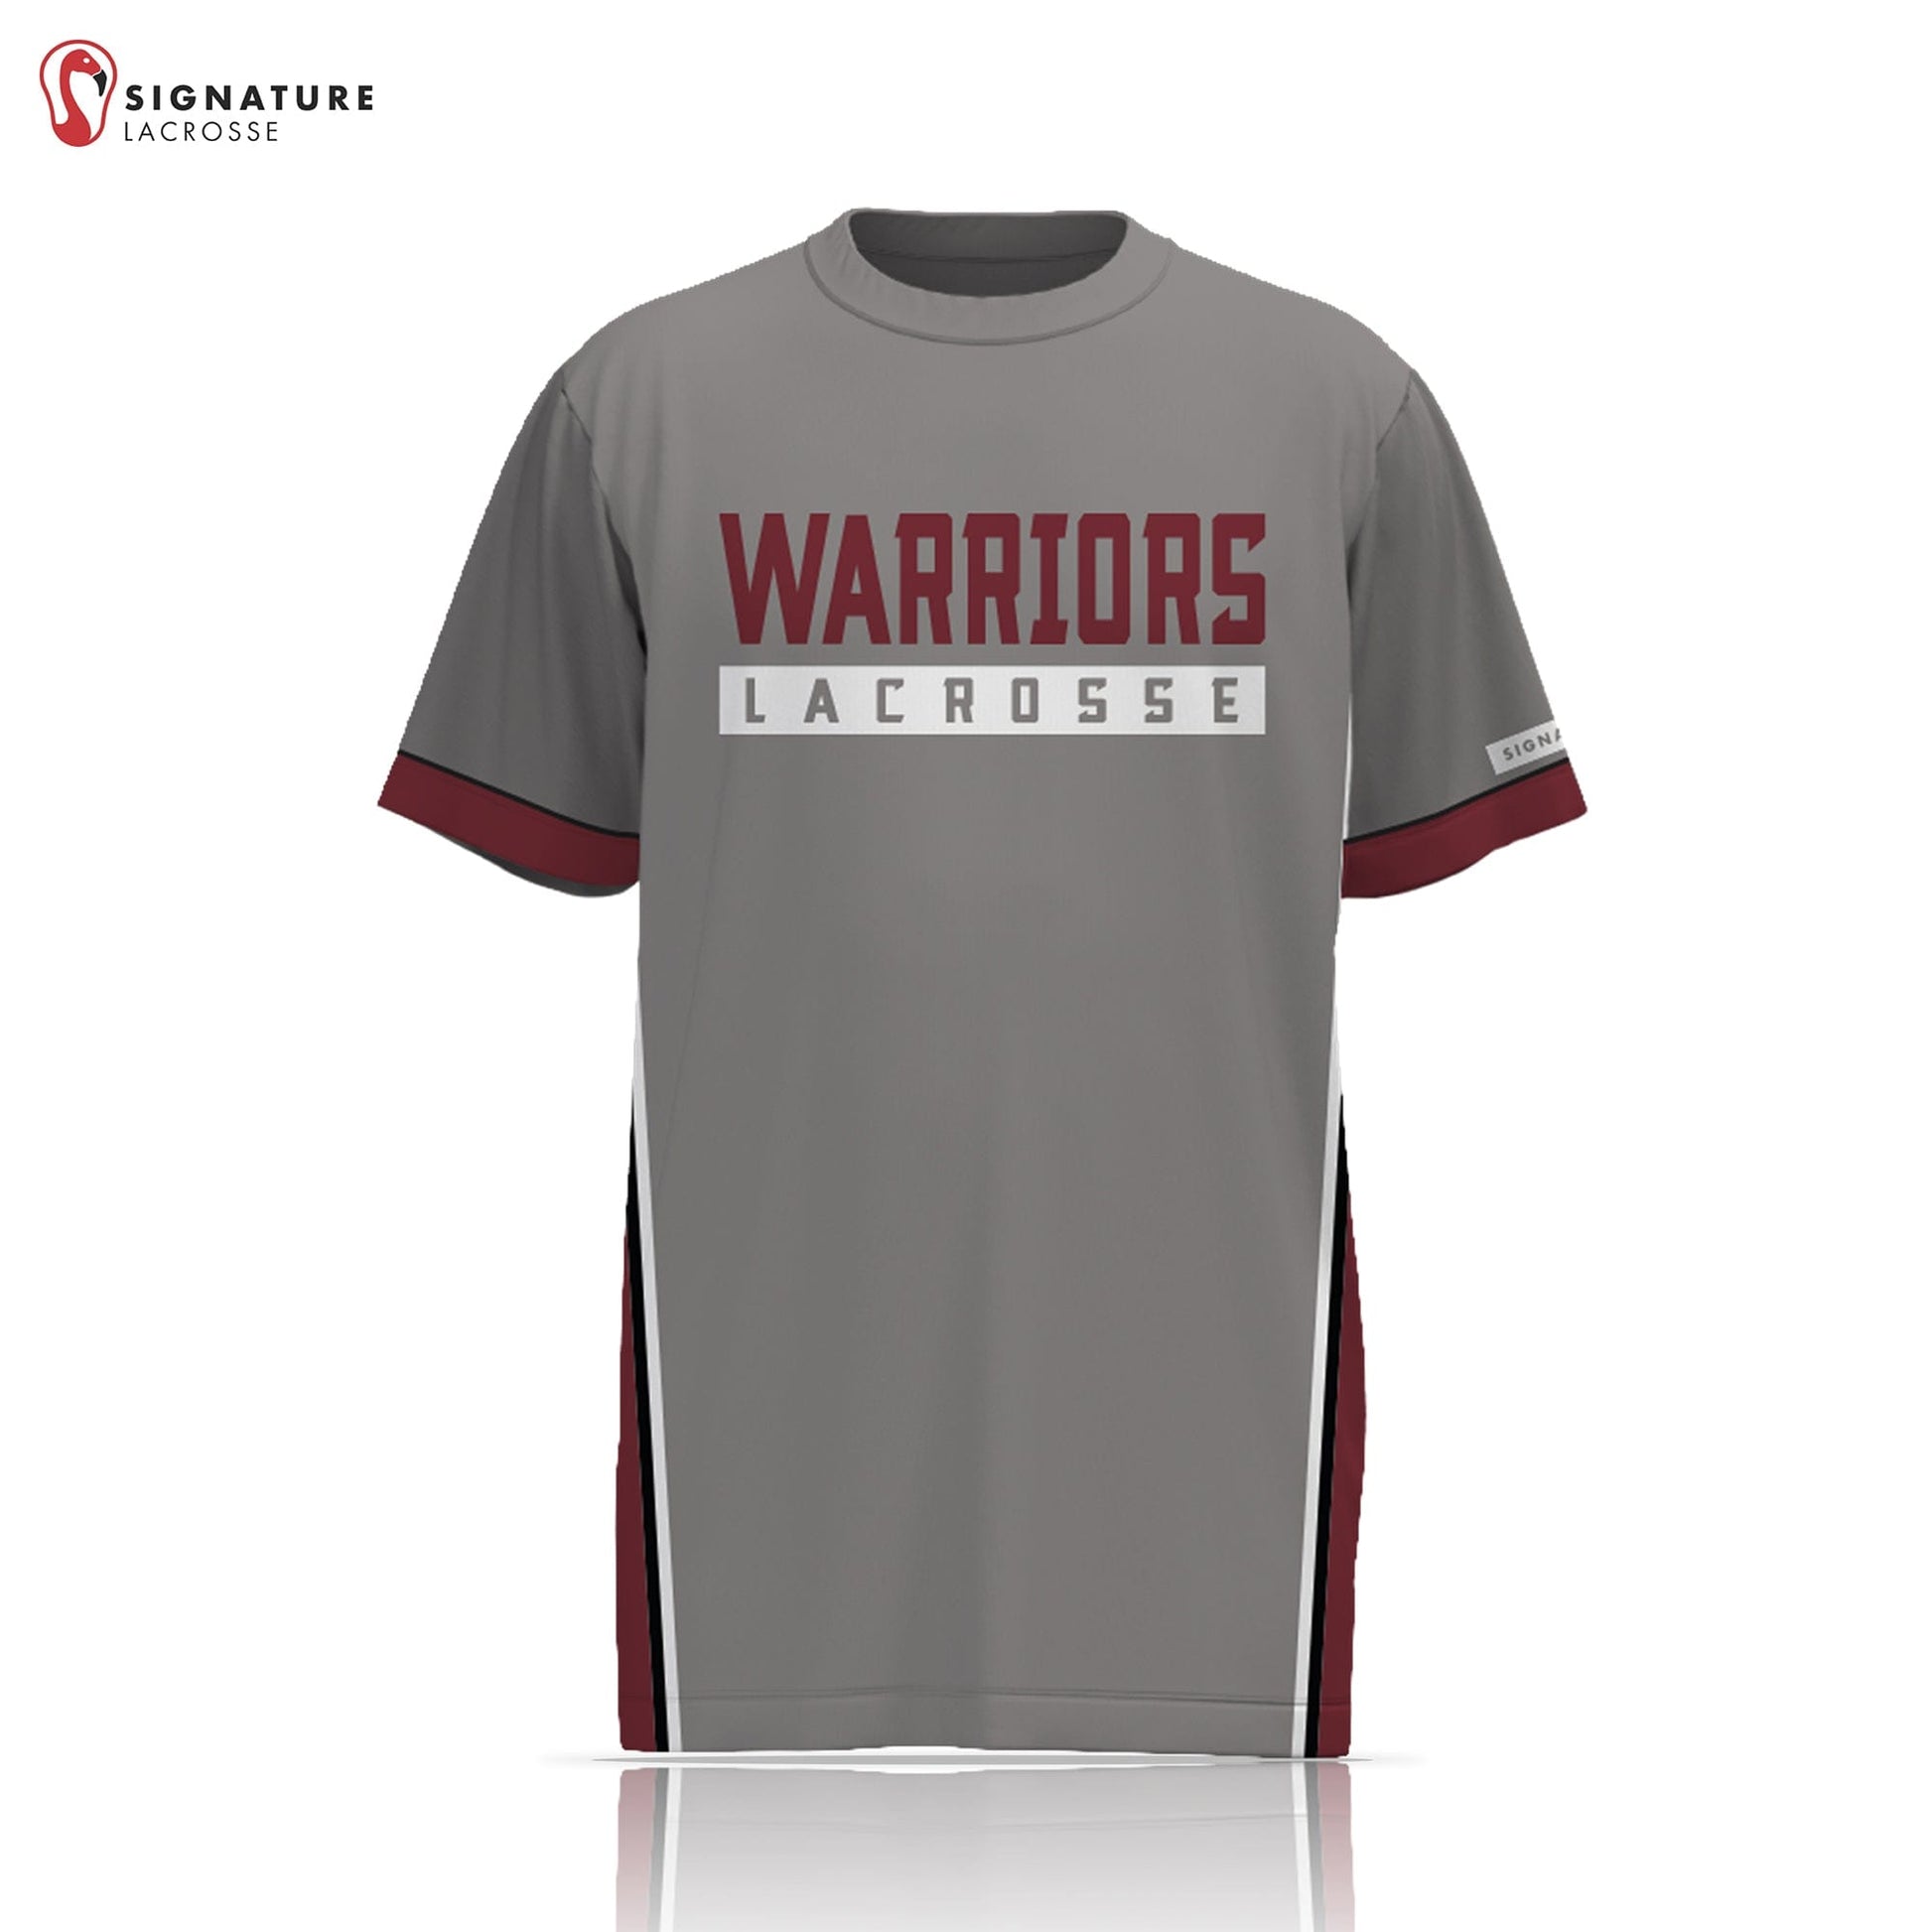 State College Player Short Sleeve Shooter Shirt: K-2 Signature Lacrosse